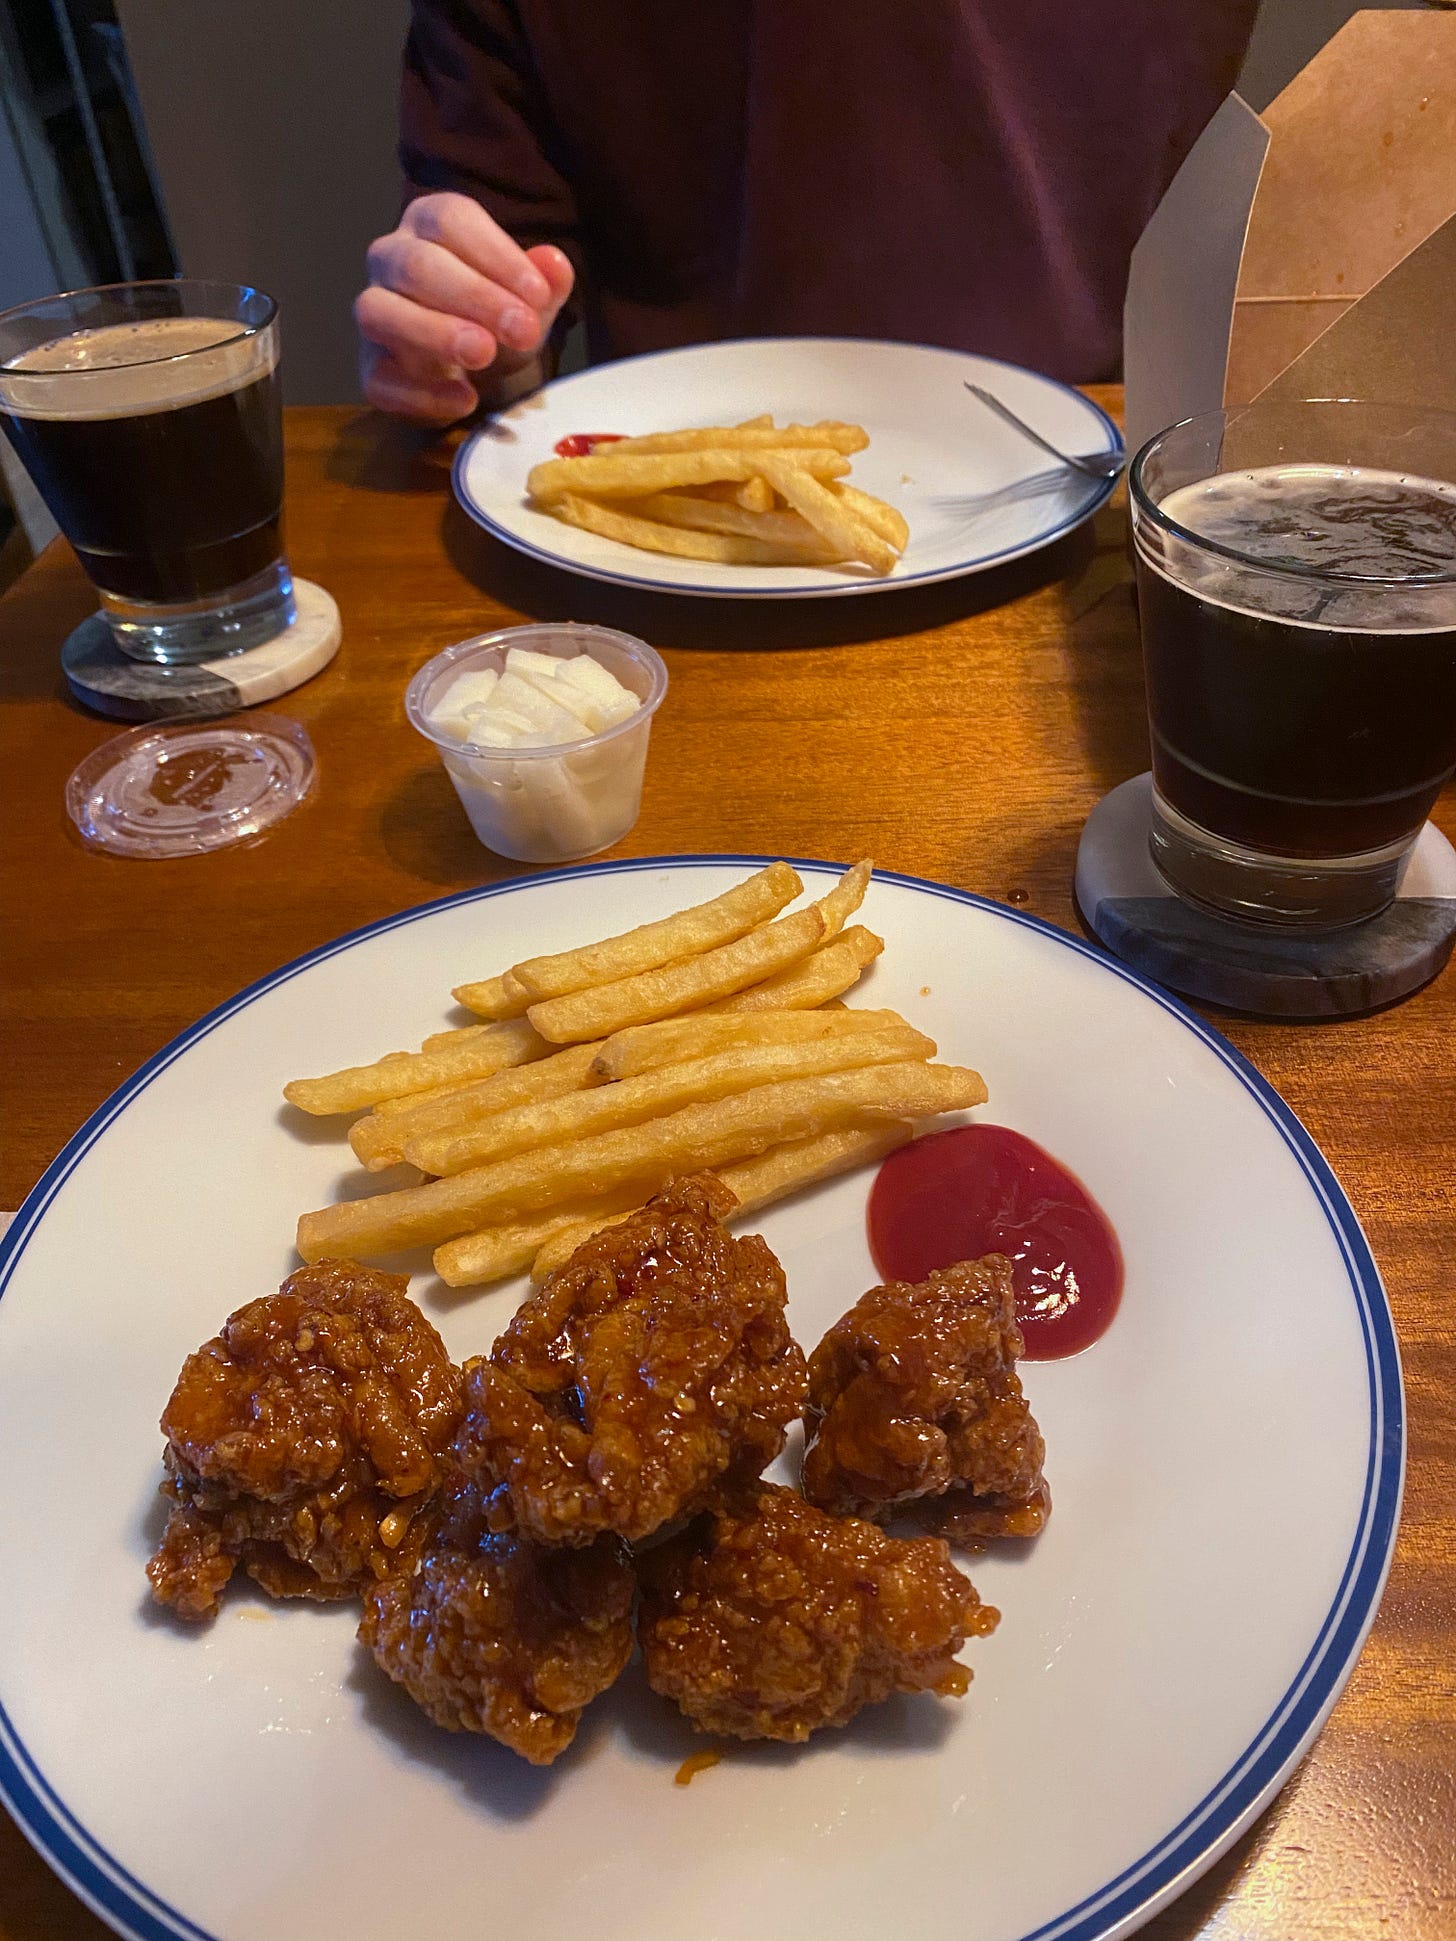 Two plates with pieces of fried chicken in a spicy-sweet sauce, thin and crispy fries, and a little pool of ketchup. Between the plates is a plastic container of pickled daikon, and two glasses of dark beer sit on coasters at the edges of the plates. Just visible in the upper right of the frame is the box holding the rest of the chicken pieces.